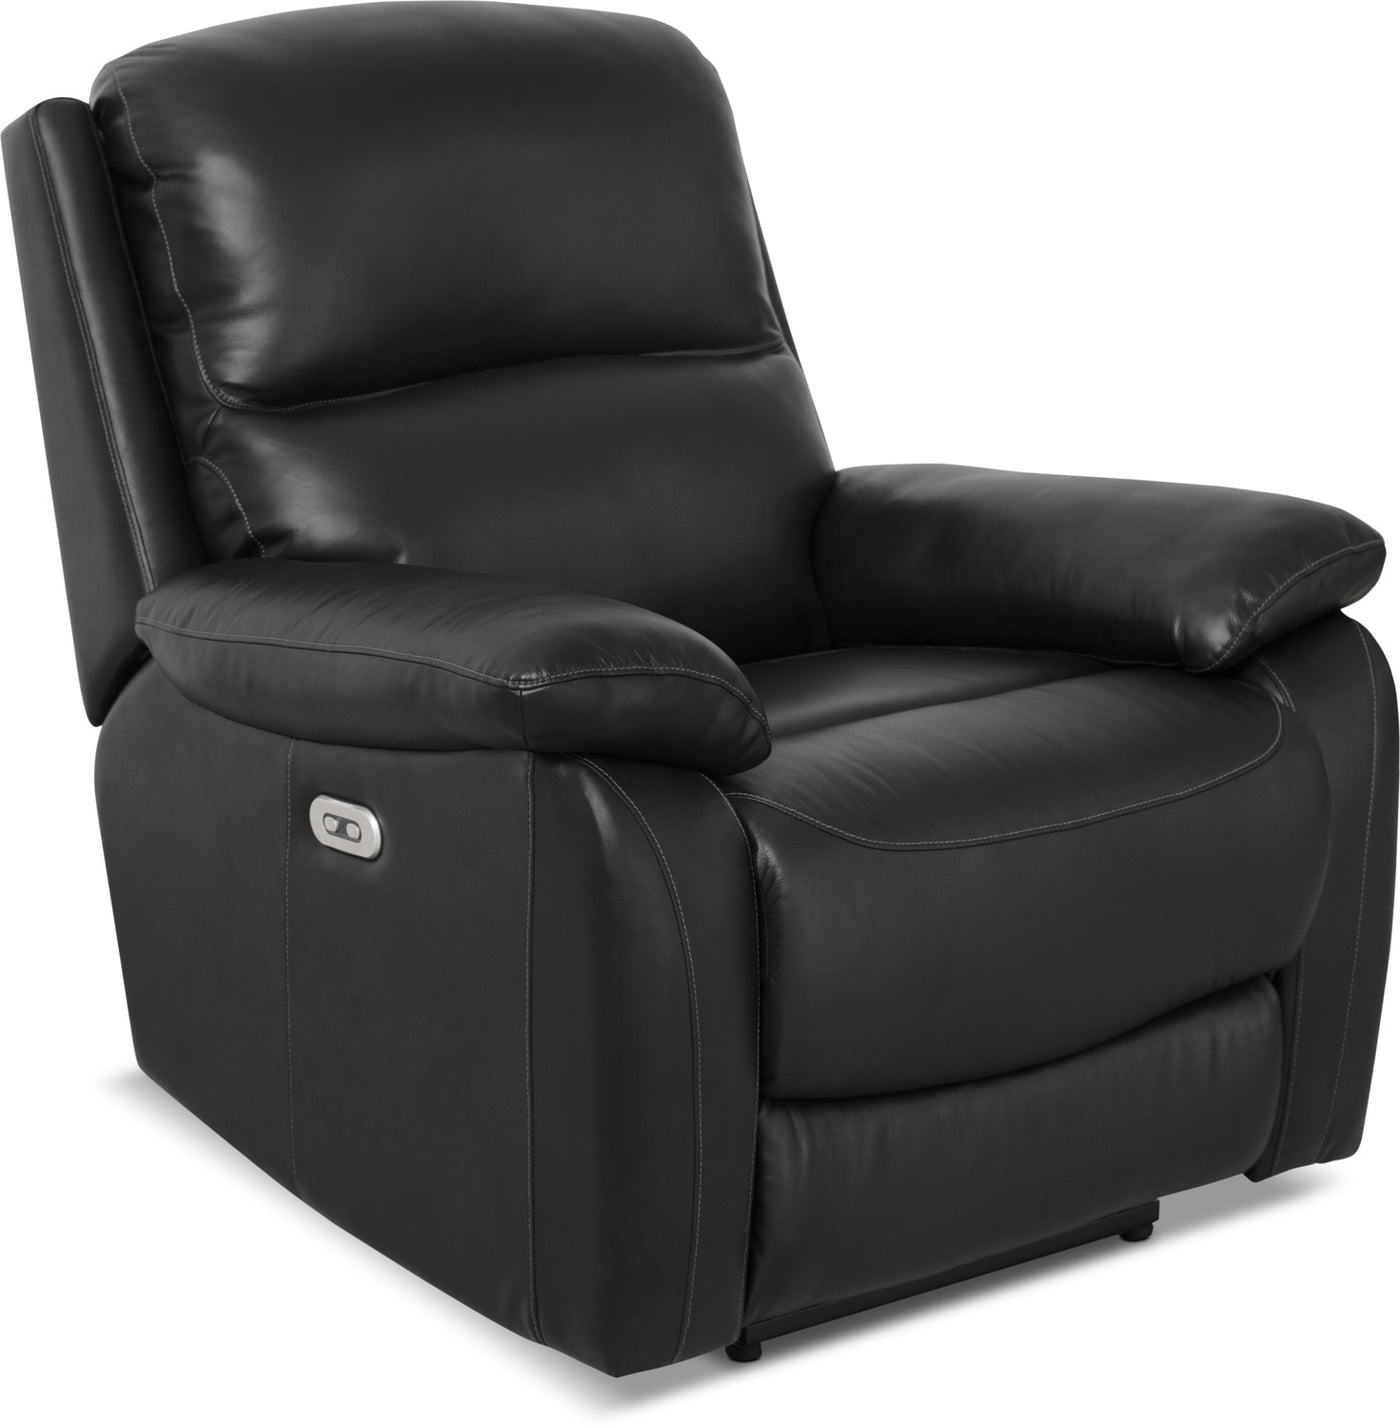 Black Recliner Chair Designs for Modern Living Spaces插图4